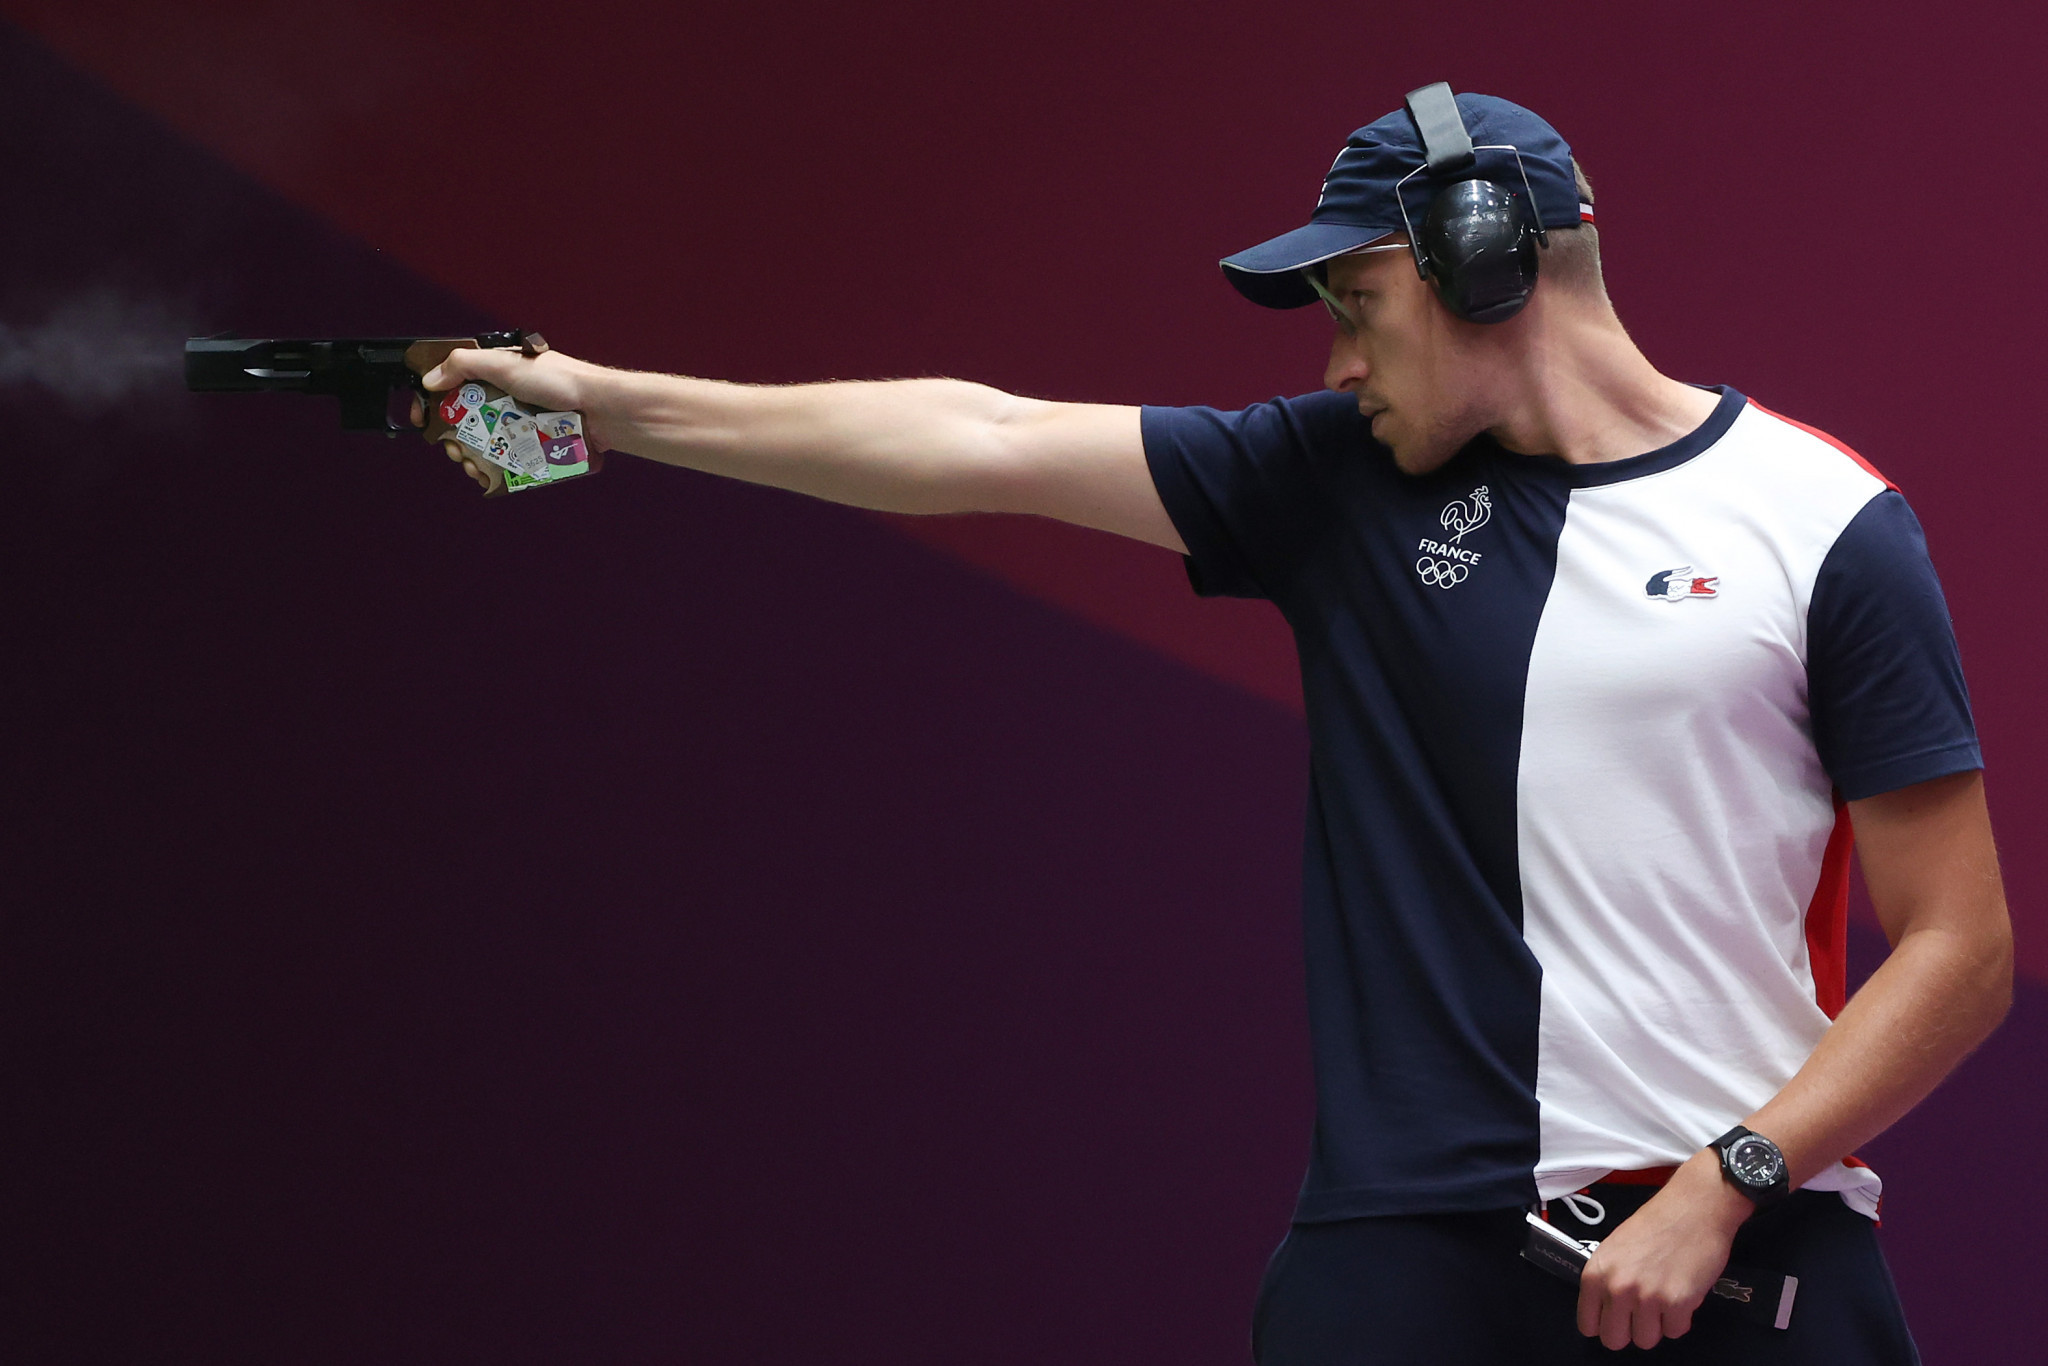 Jean Quiquampoix of France claimed victory in the men's 25m rapid fire pistol at the ISSF World Cup in Baku ©Getty Images